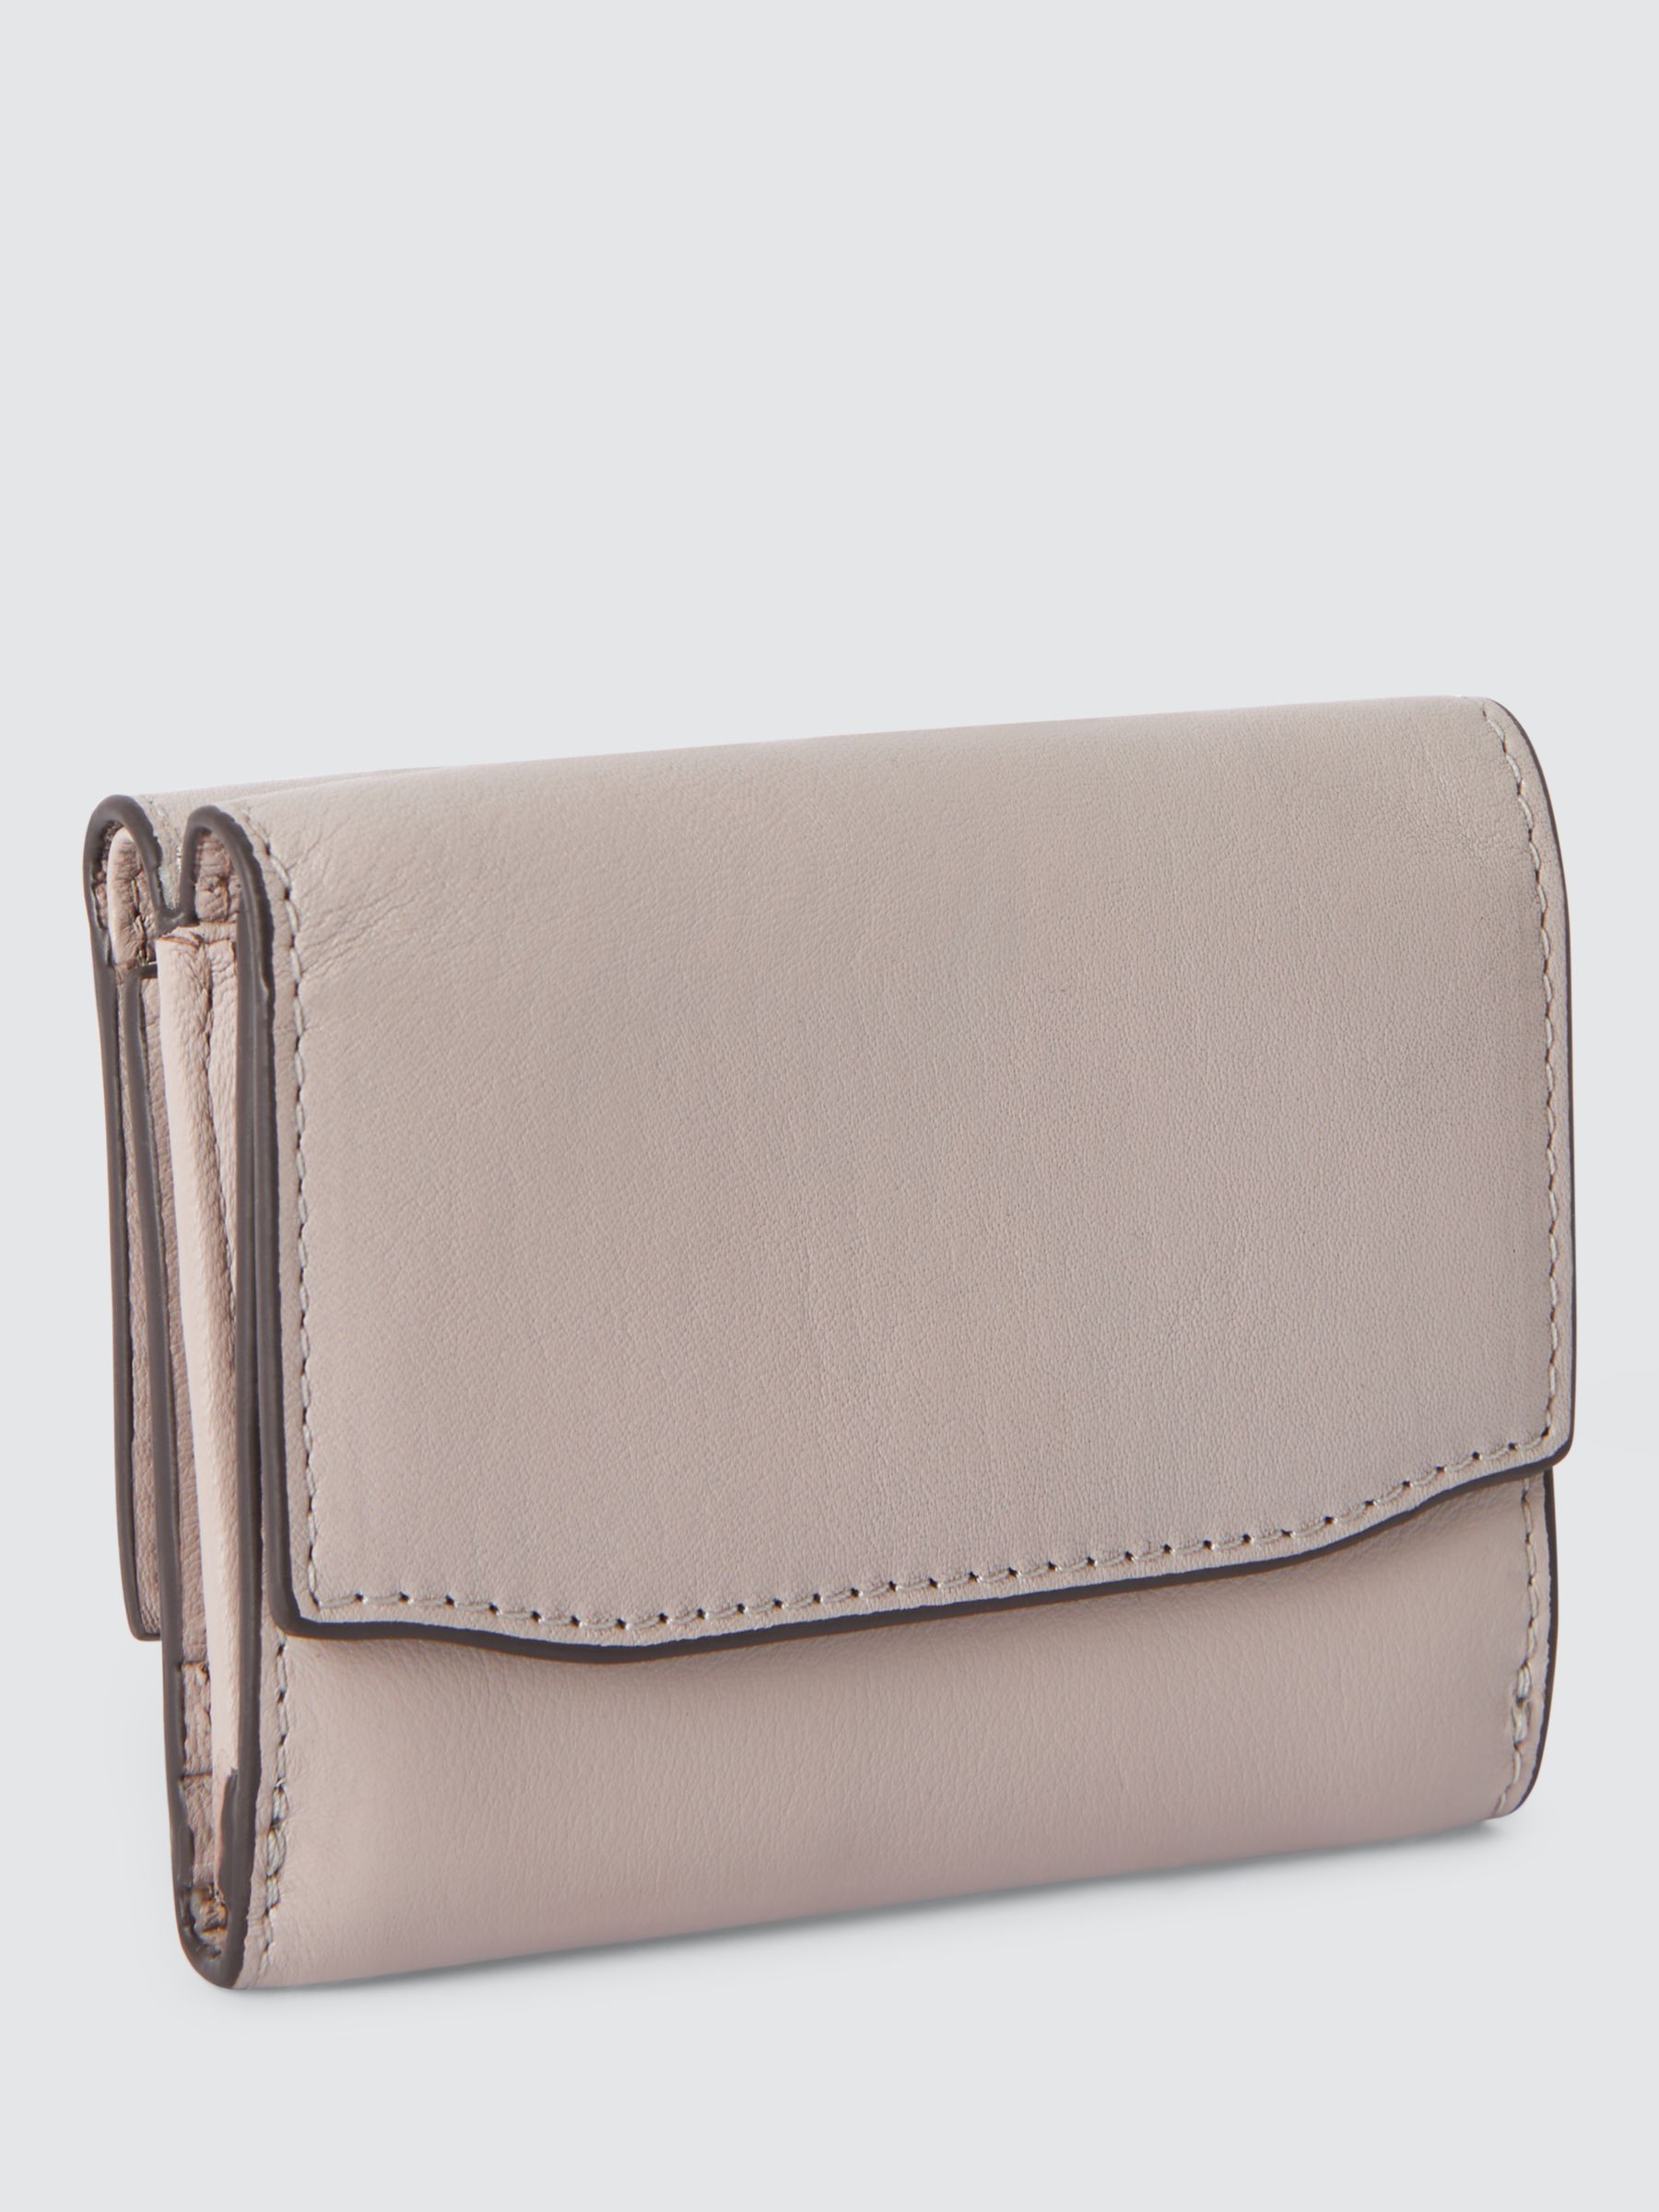 Buy John Lewis Trifold Leather Purse Online at johnlewis.com